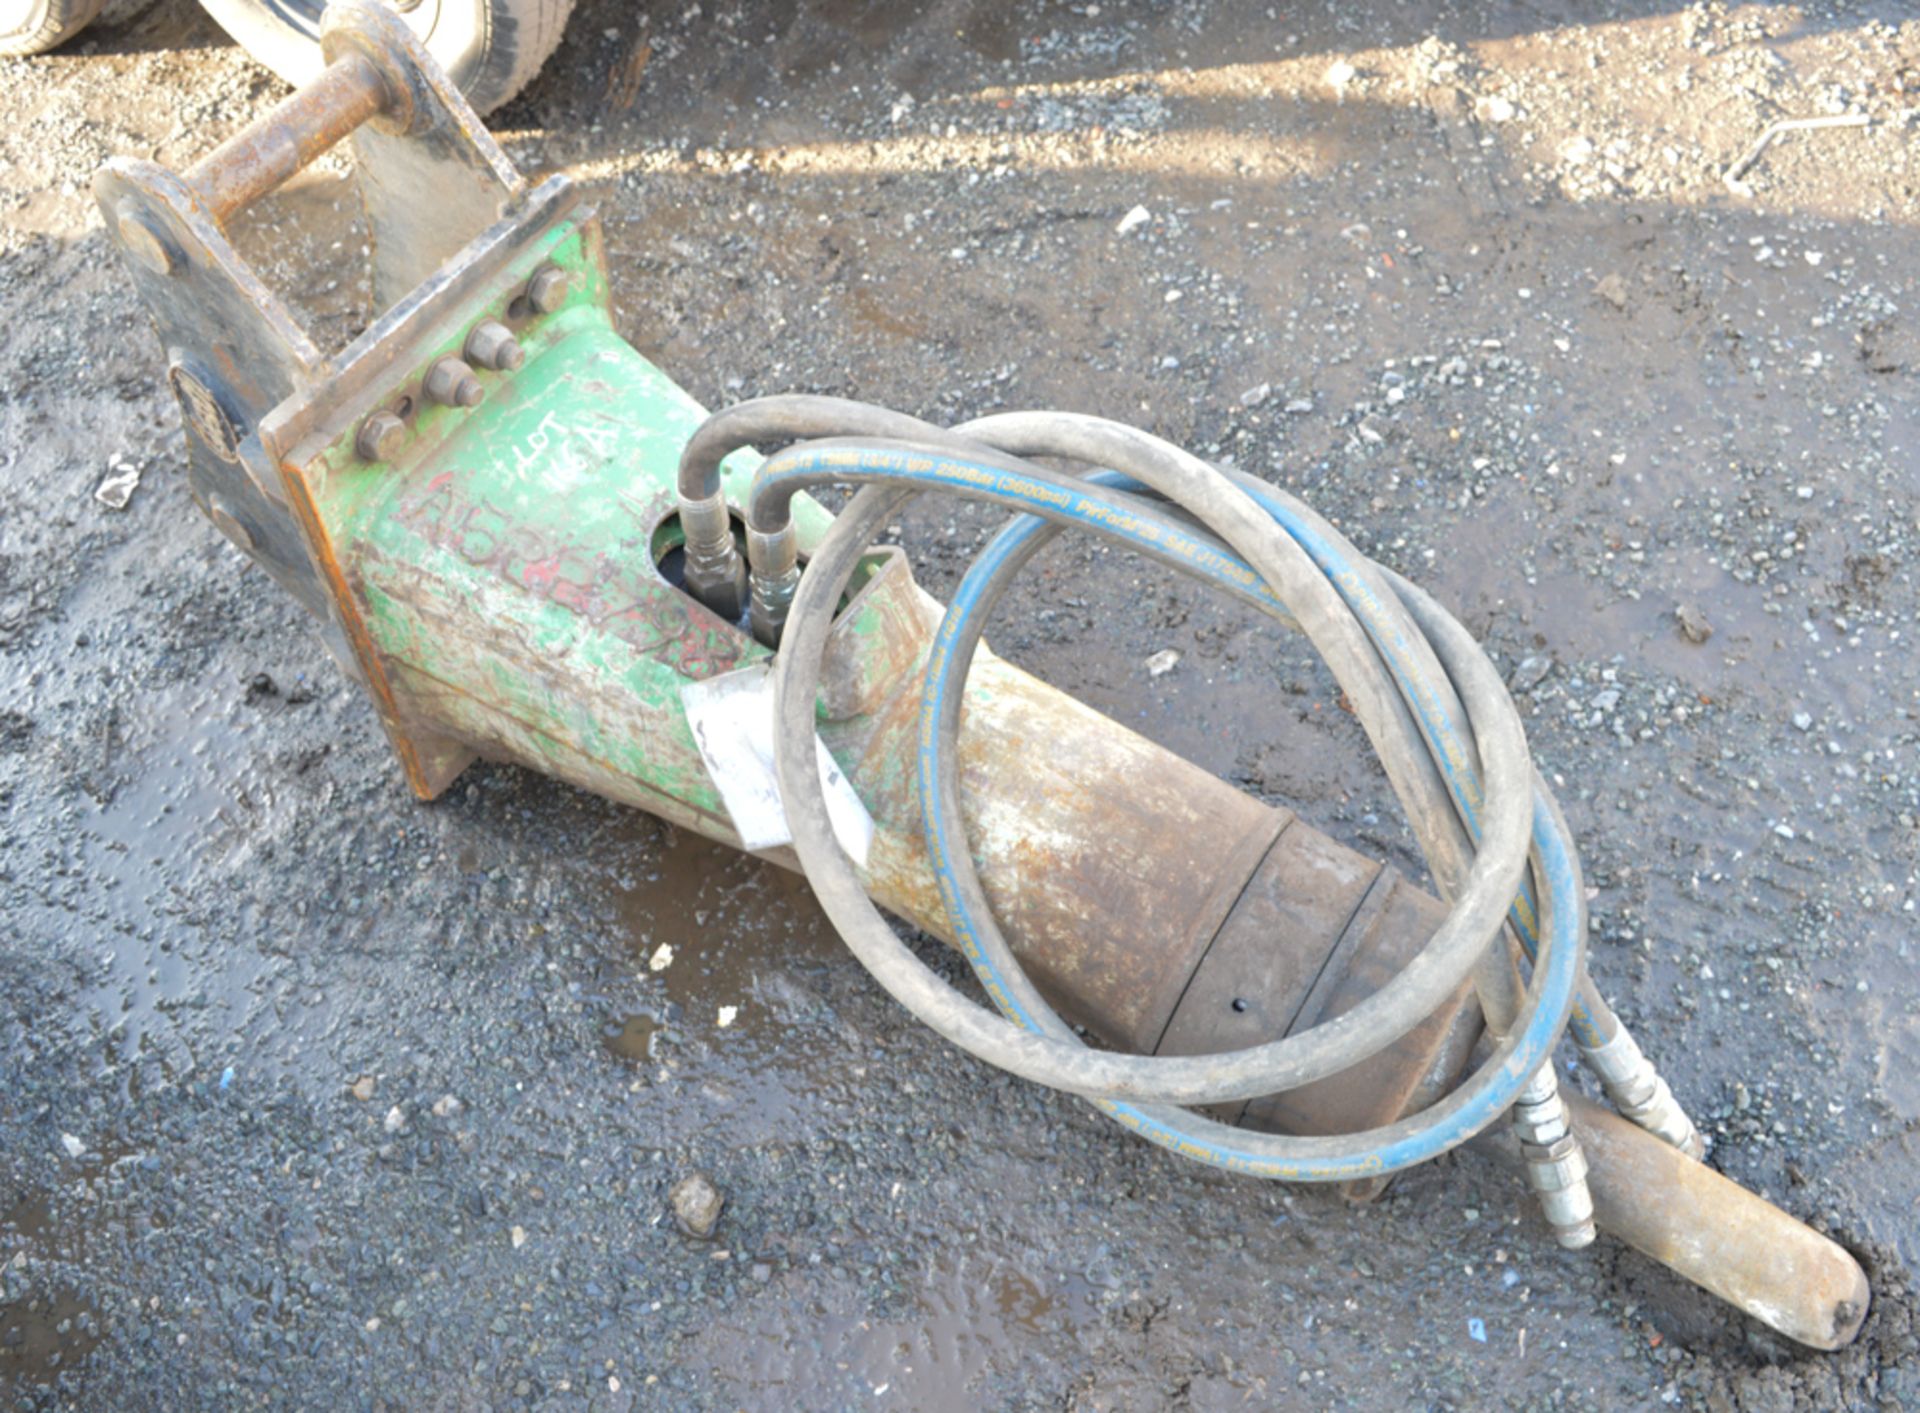 Geth hydraulic breaker to suit 5 to 8 tonne excavator A522798 - Image 2 of 2